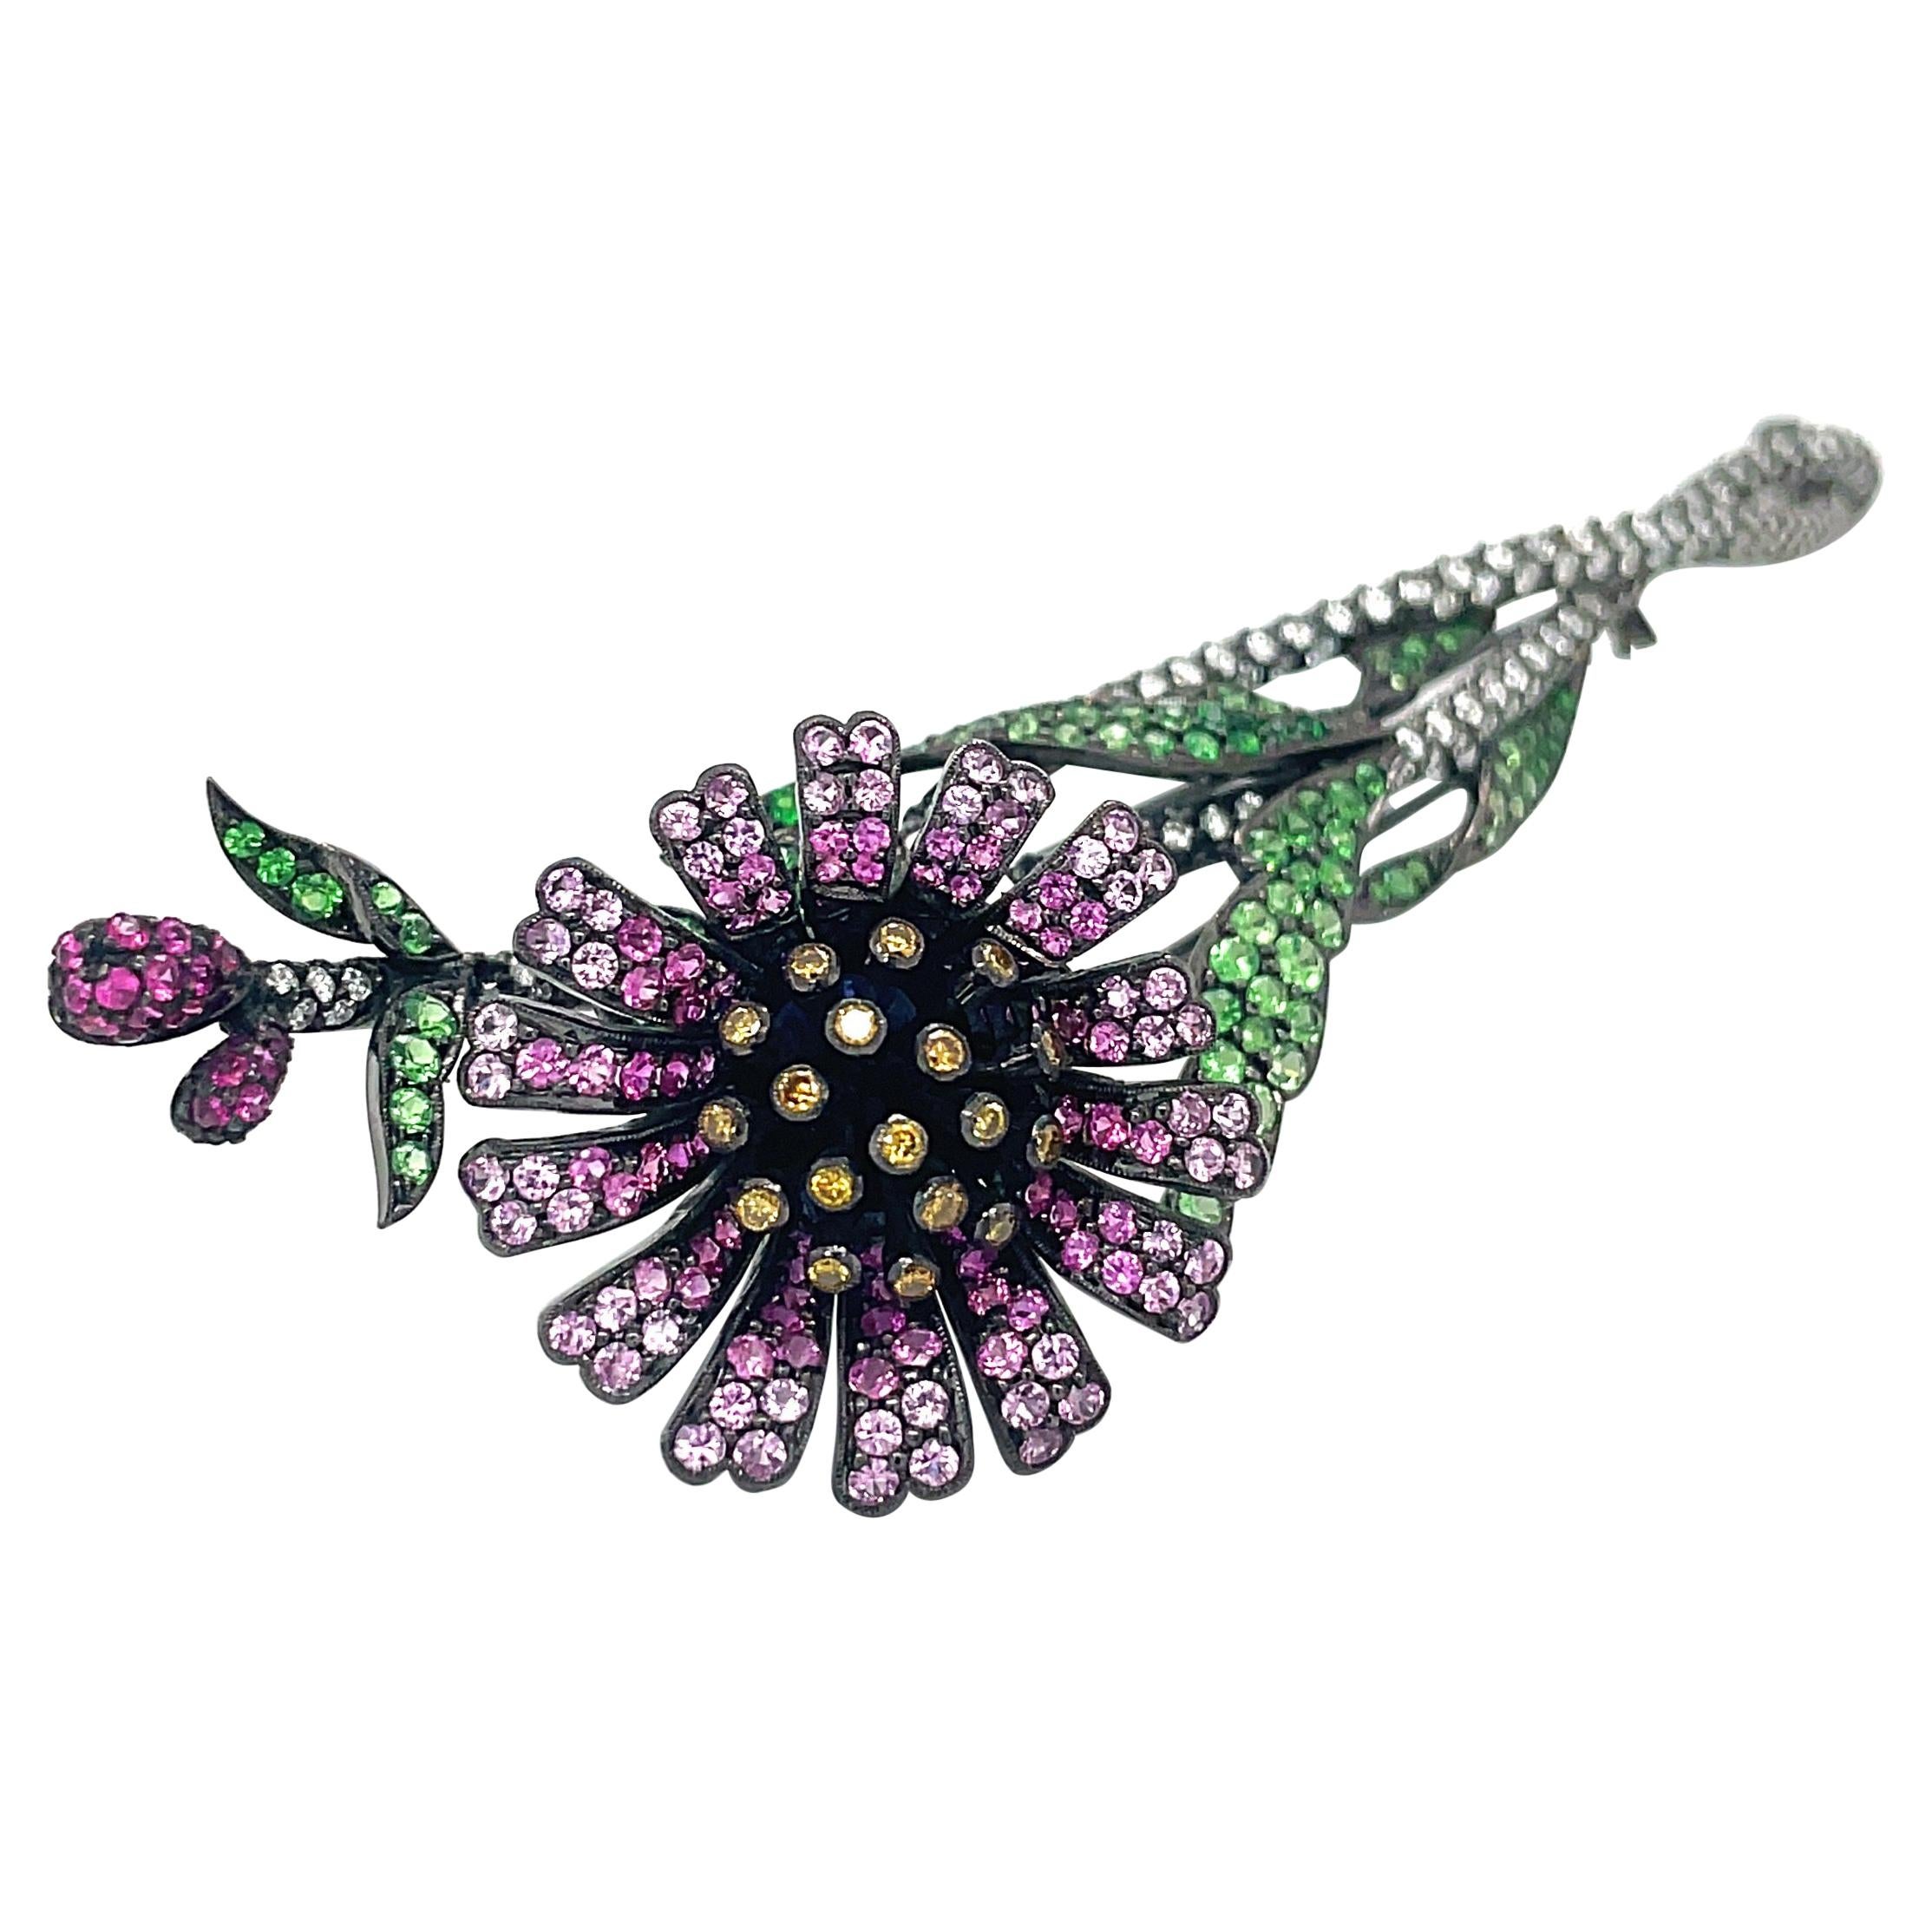 Blackened 18kt Gold Flower Brooch with Diamonds, Pink Sapphires and Tsavorite For Sale